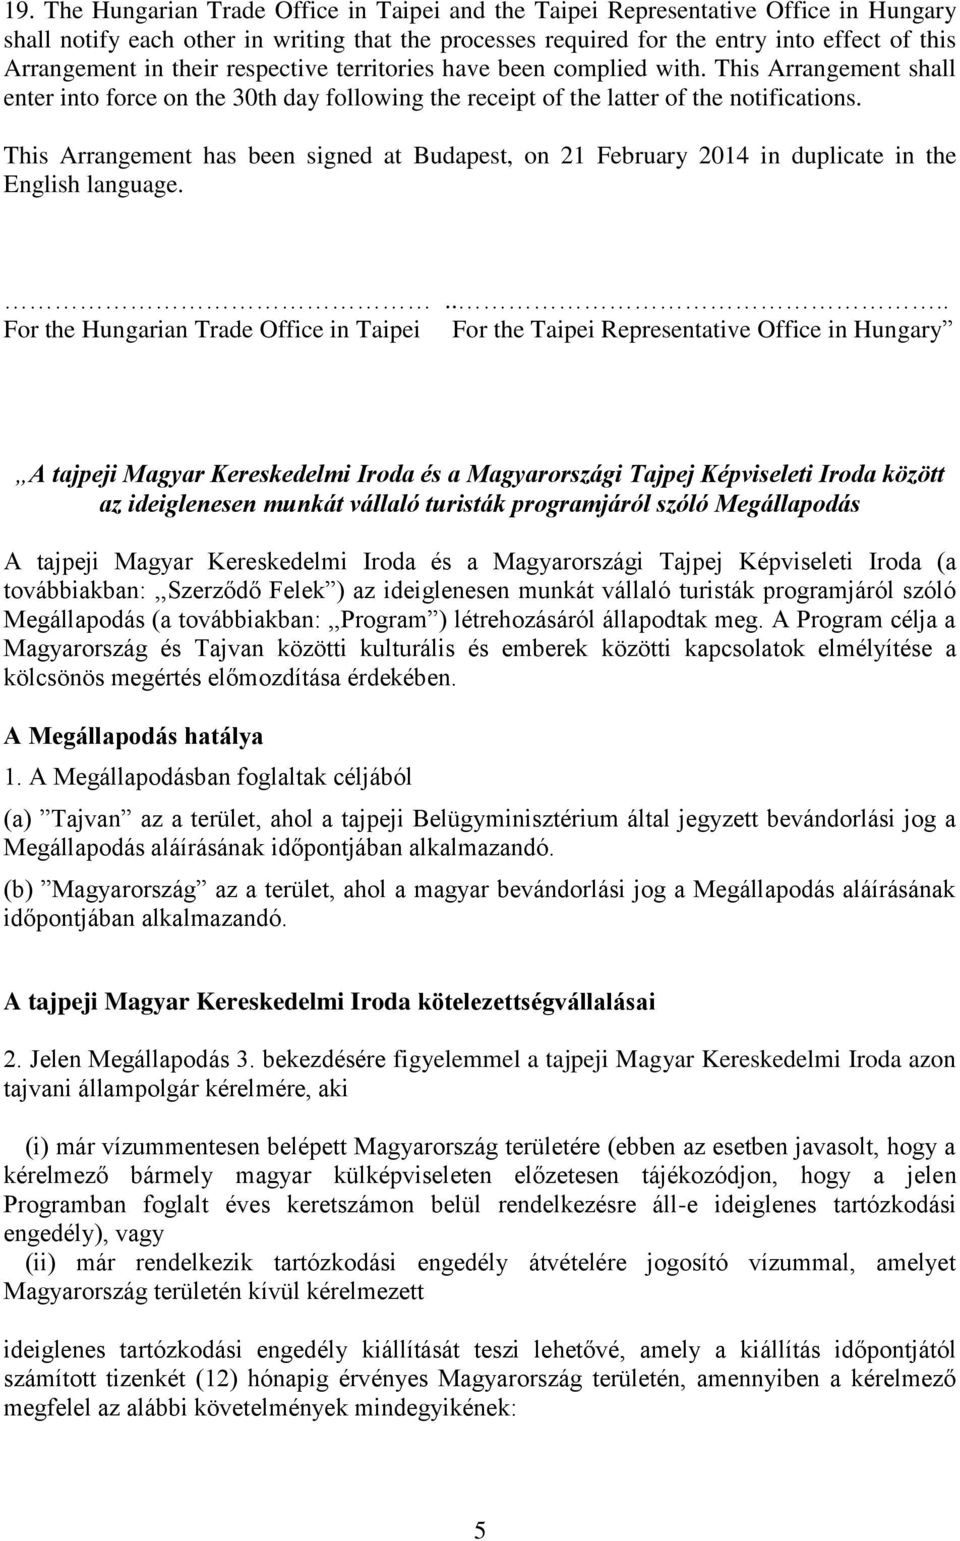 This Arrangement has been signed at Budapest, on 21 February 2014 in duplicate in the English language.